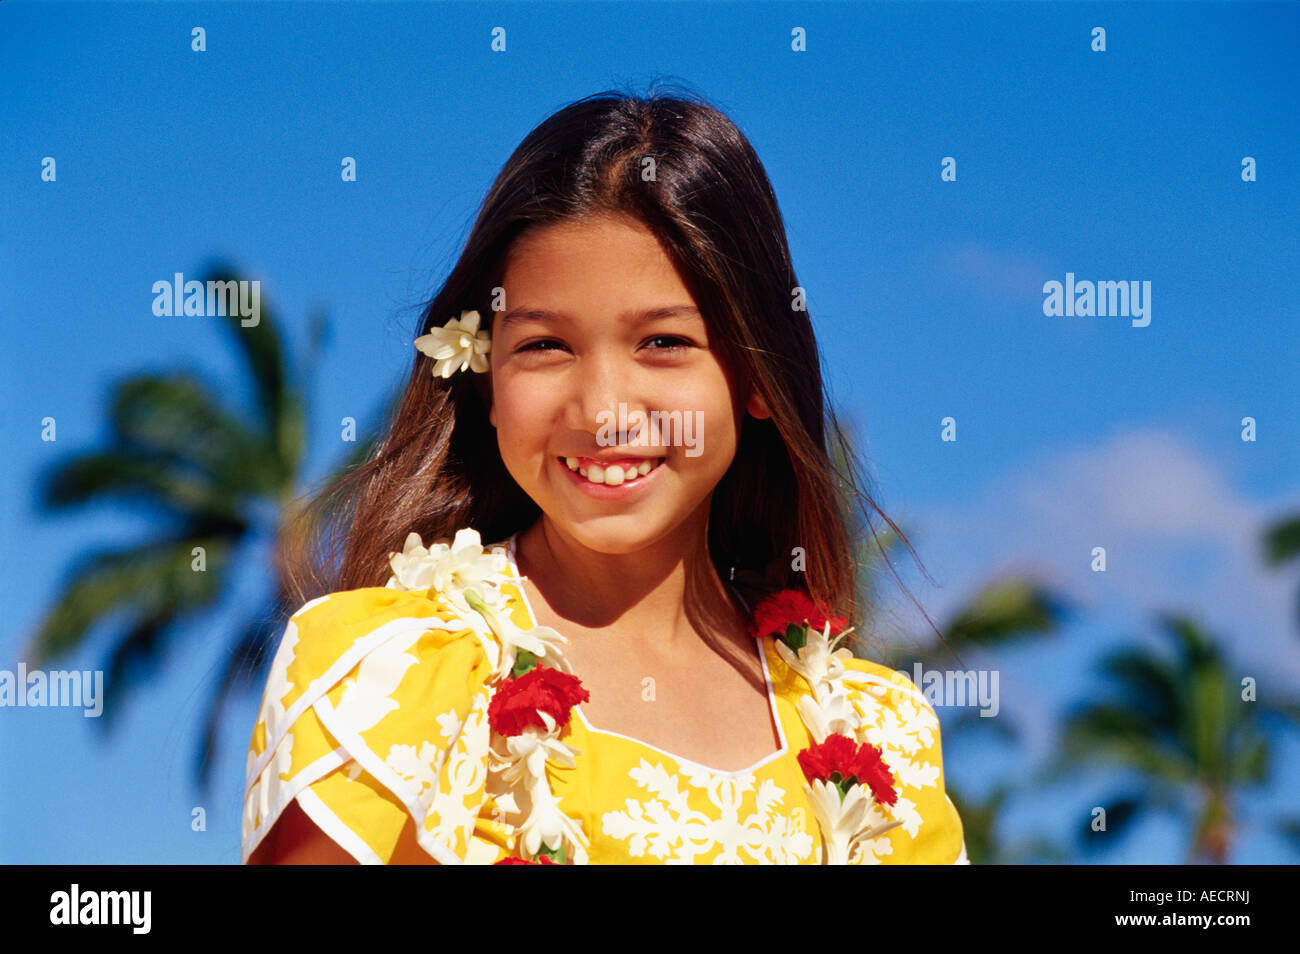 Full Length Portrait Of Beautiful Emotional Coquette Girl With Pretty Smile  In Pinup Style Demonstrating Hawaiian Flowers Necklace, Sunglasses On Face,  Isolated On Blue Stock Photo, Picture and Royalty Free Image. Image